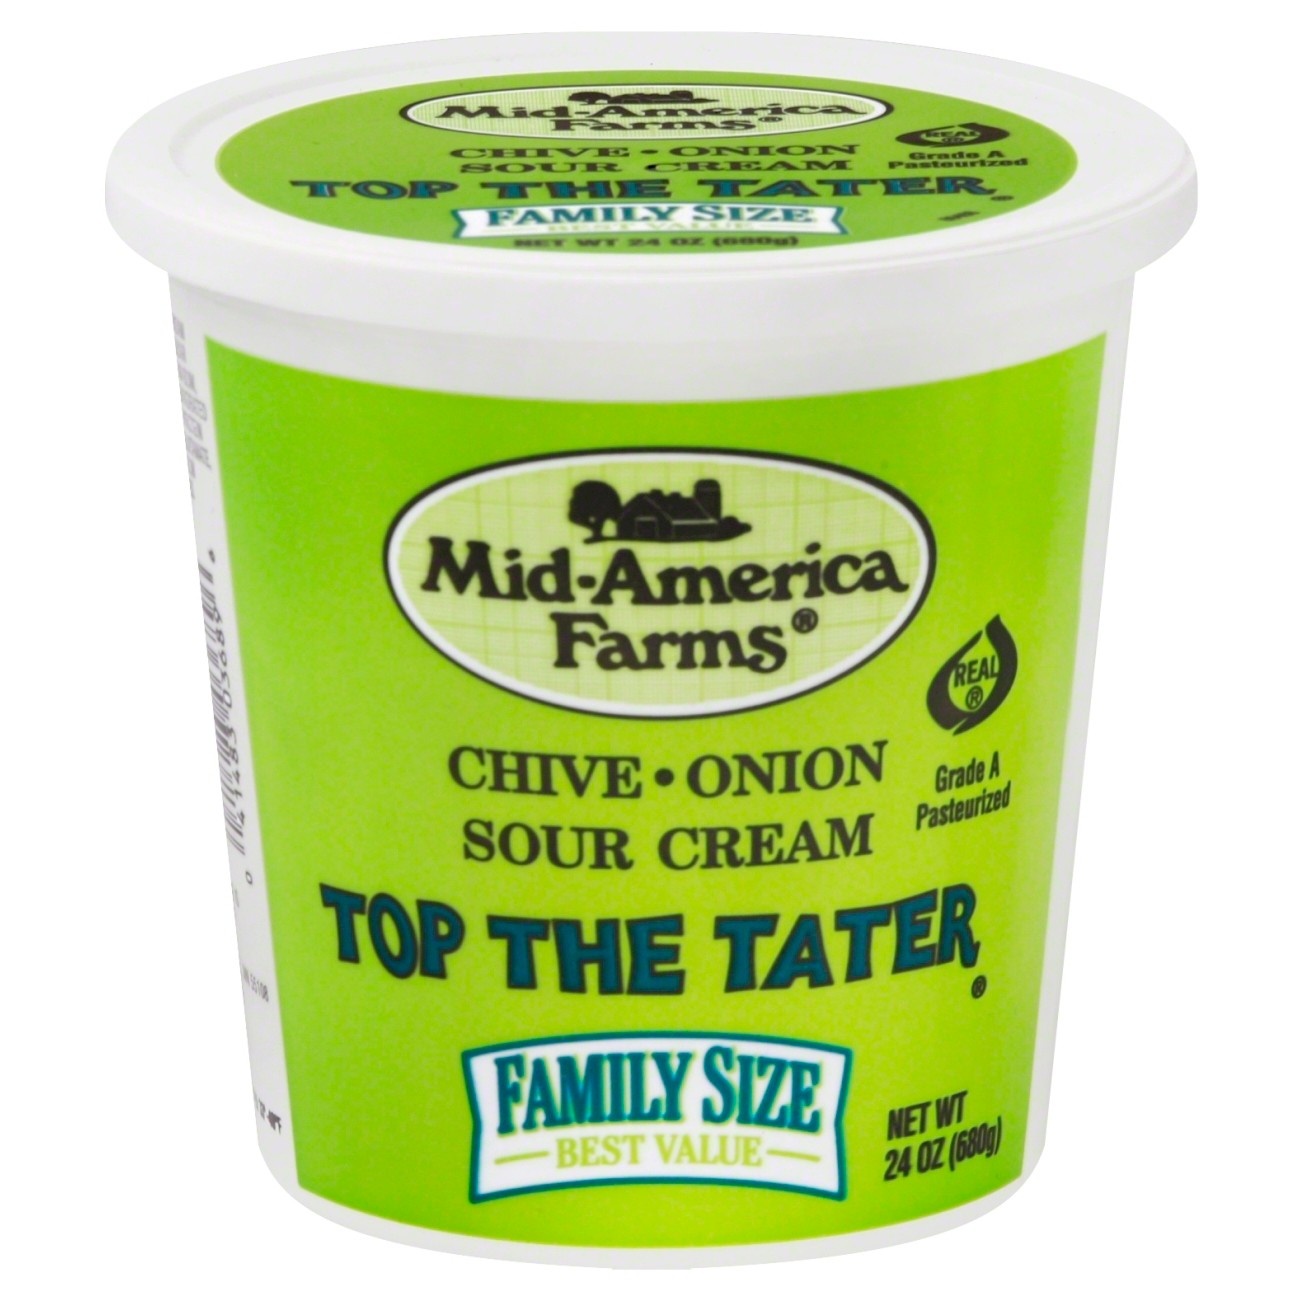 slide 1 of 6, Mid-America Farms Family Size Top The Tater Chive Onion Sour Cream, 24 oz